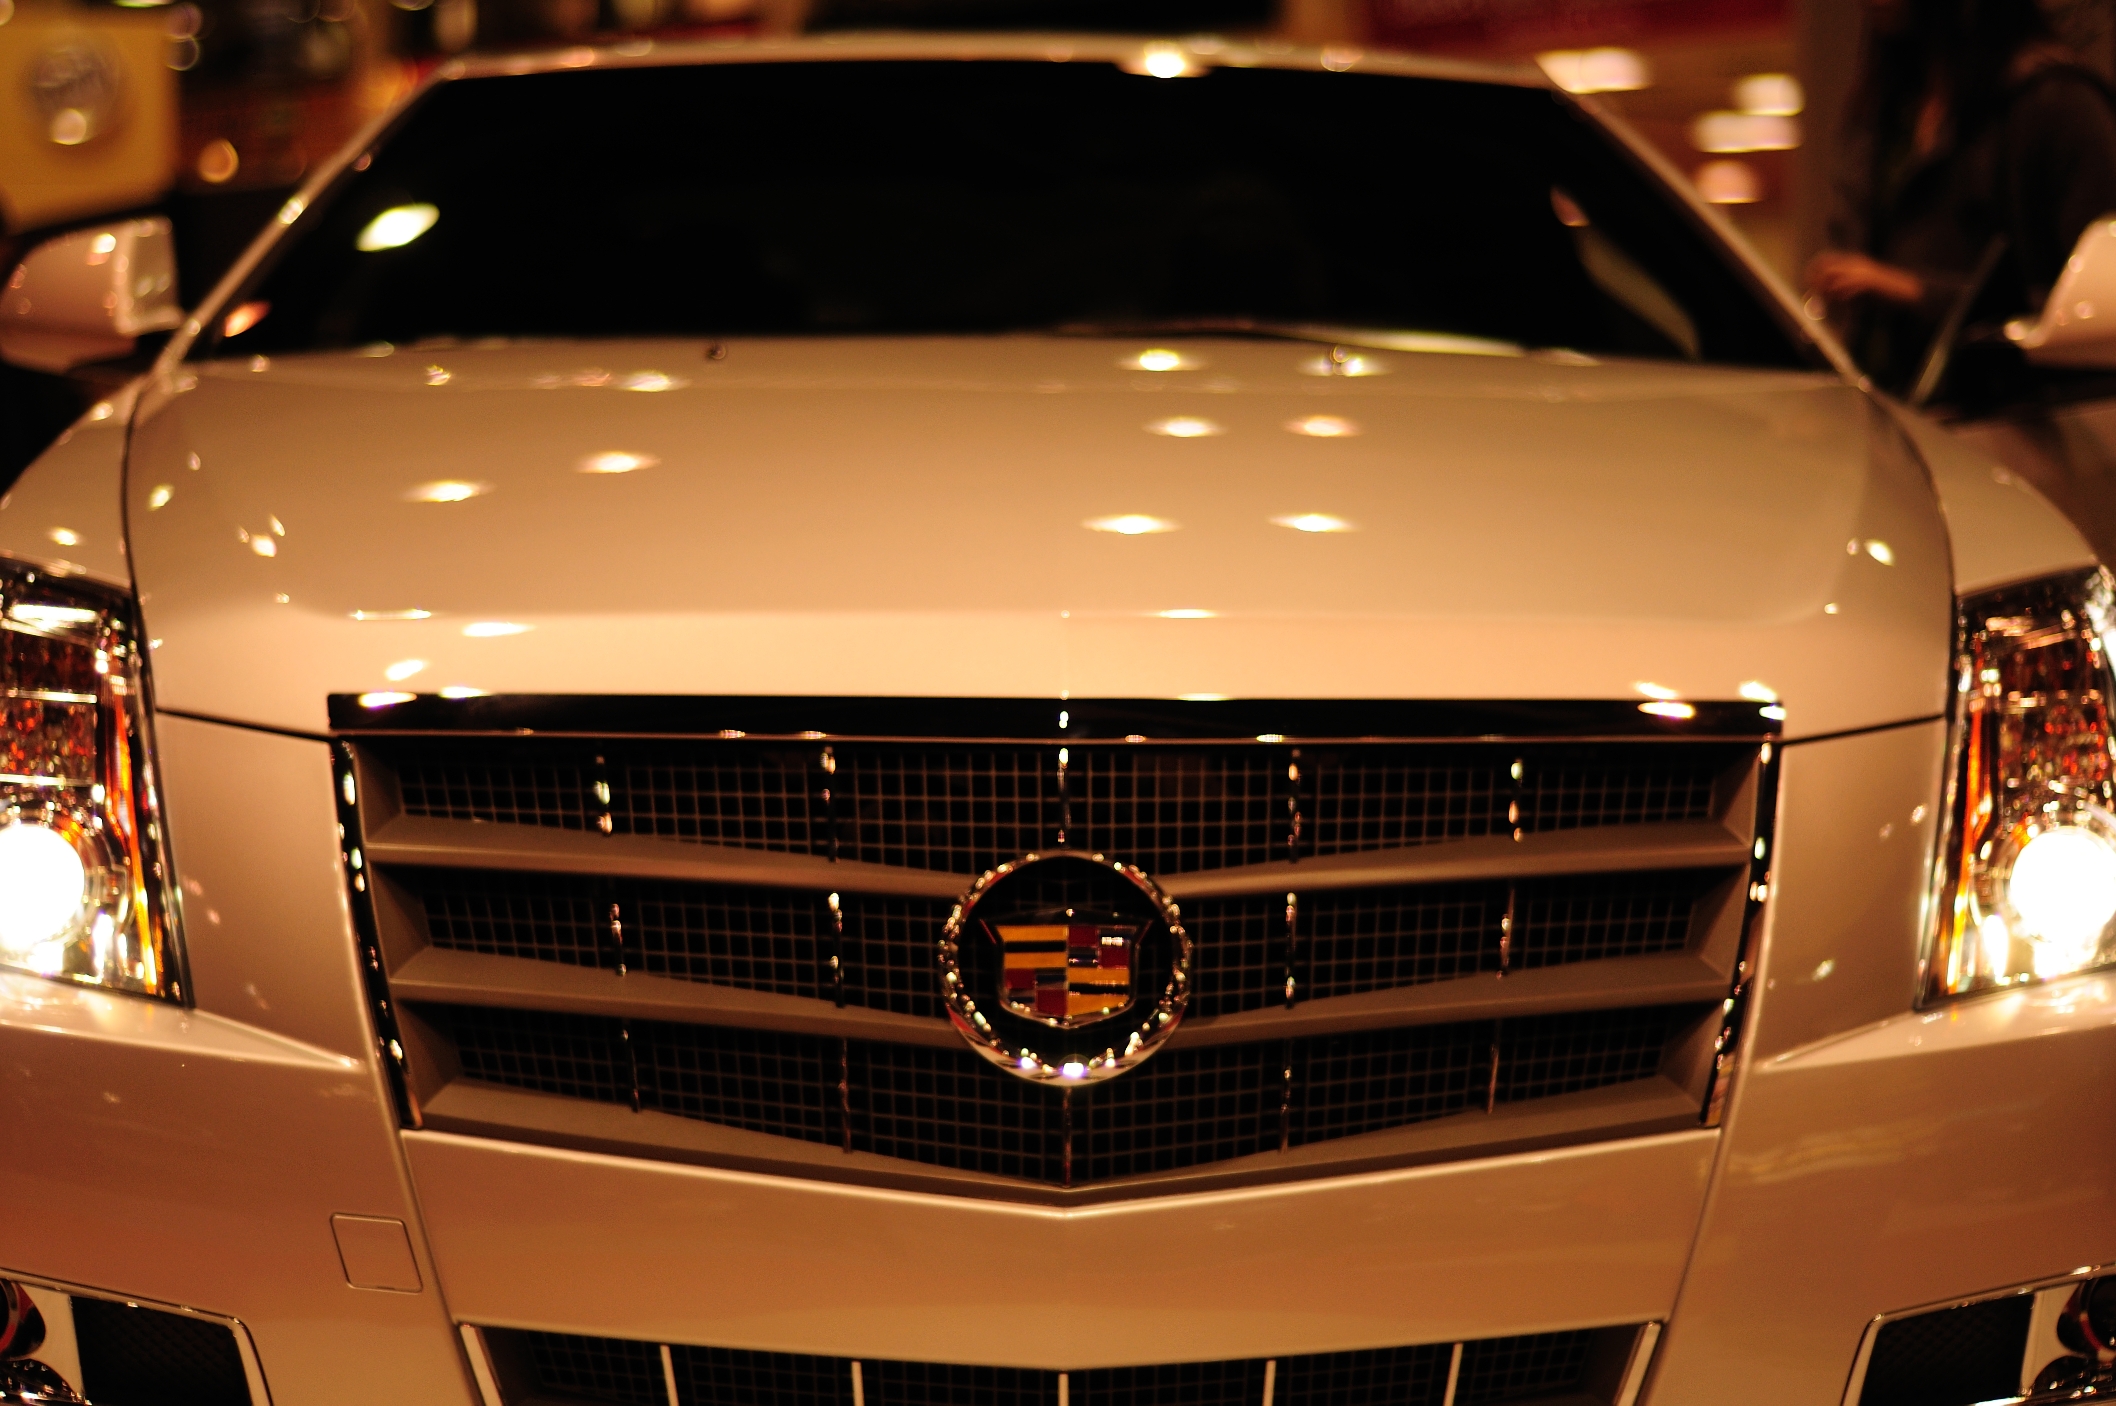 the grills on this white luxury vehicle are lit by lights